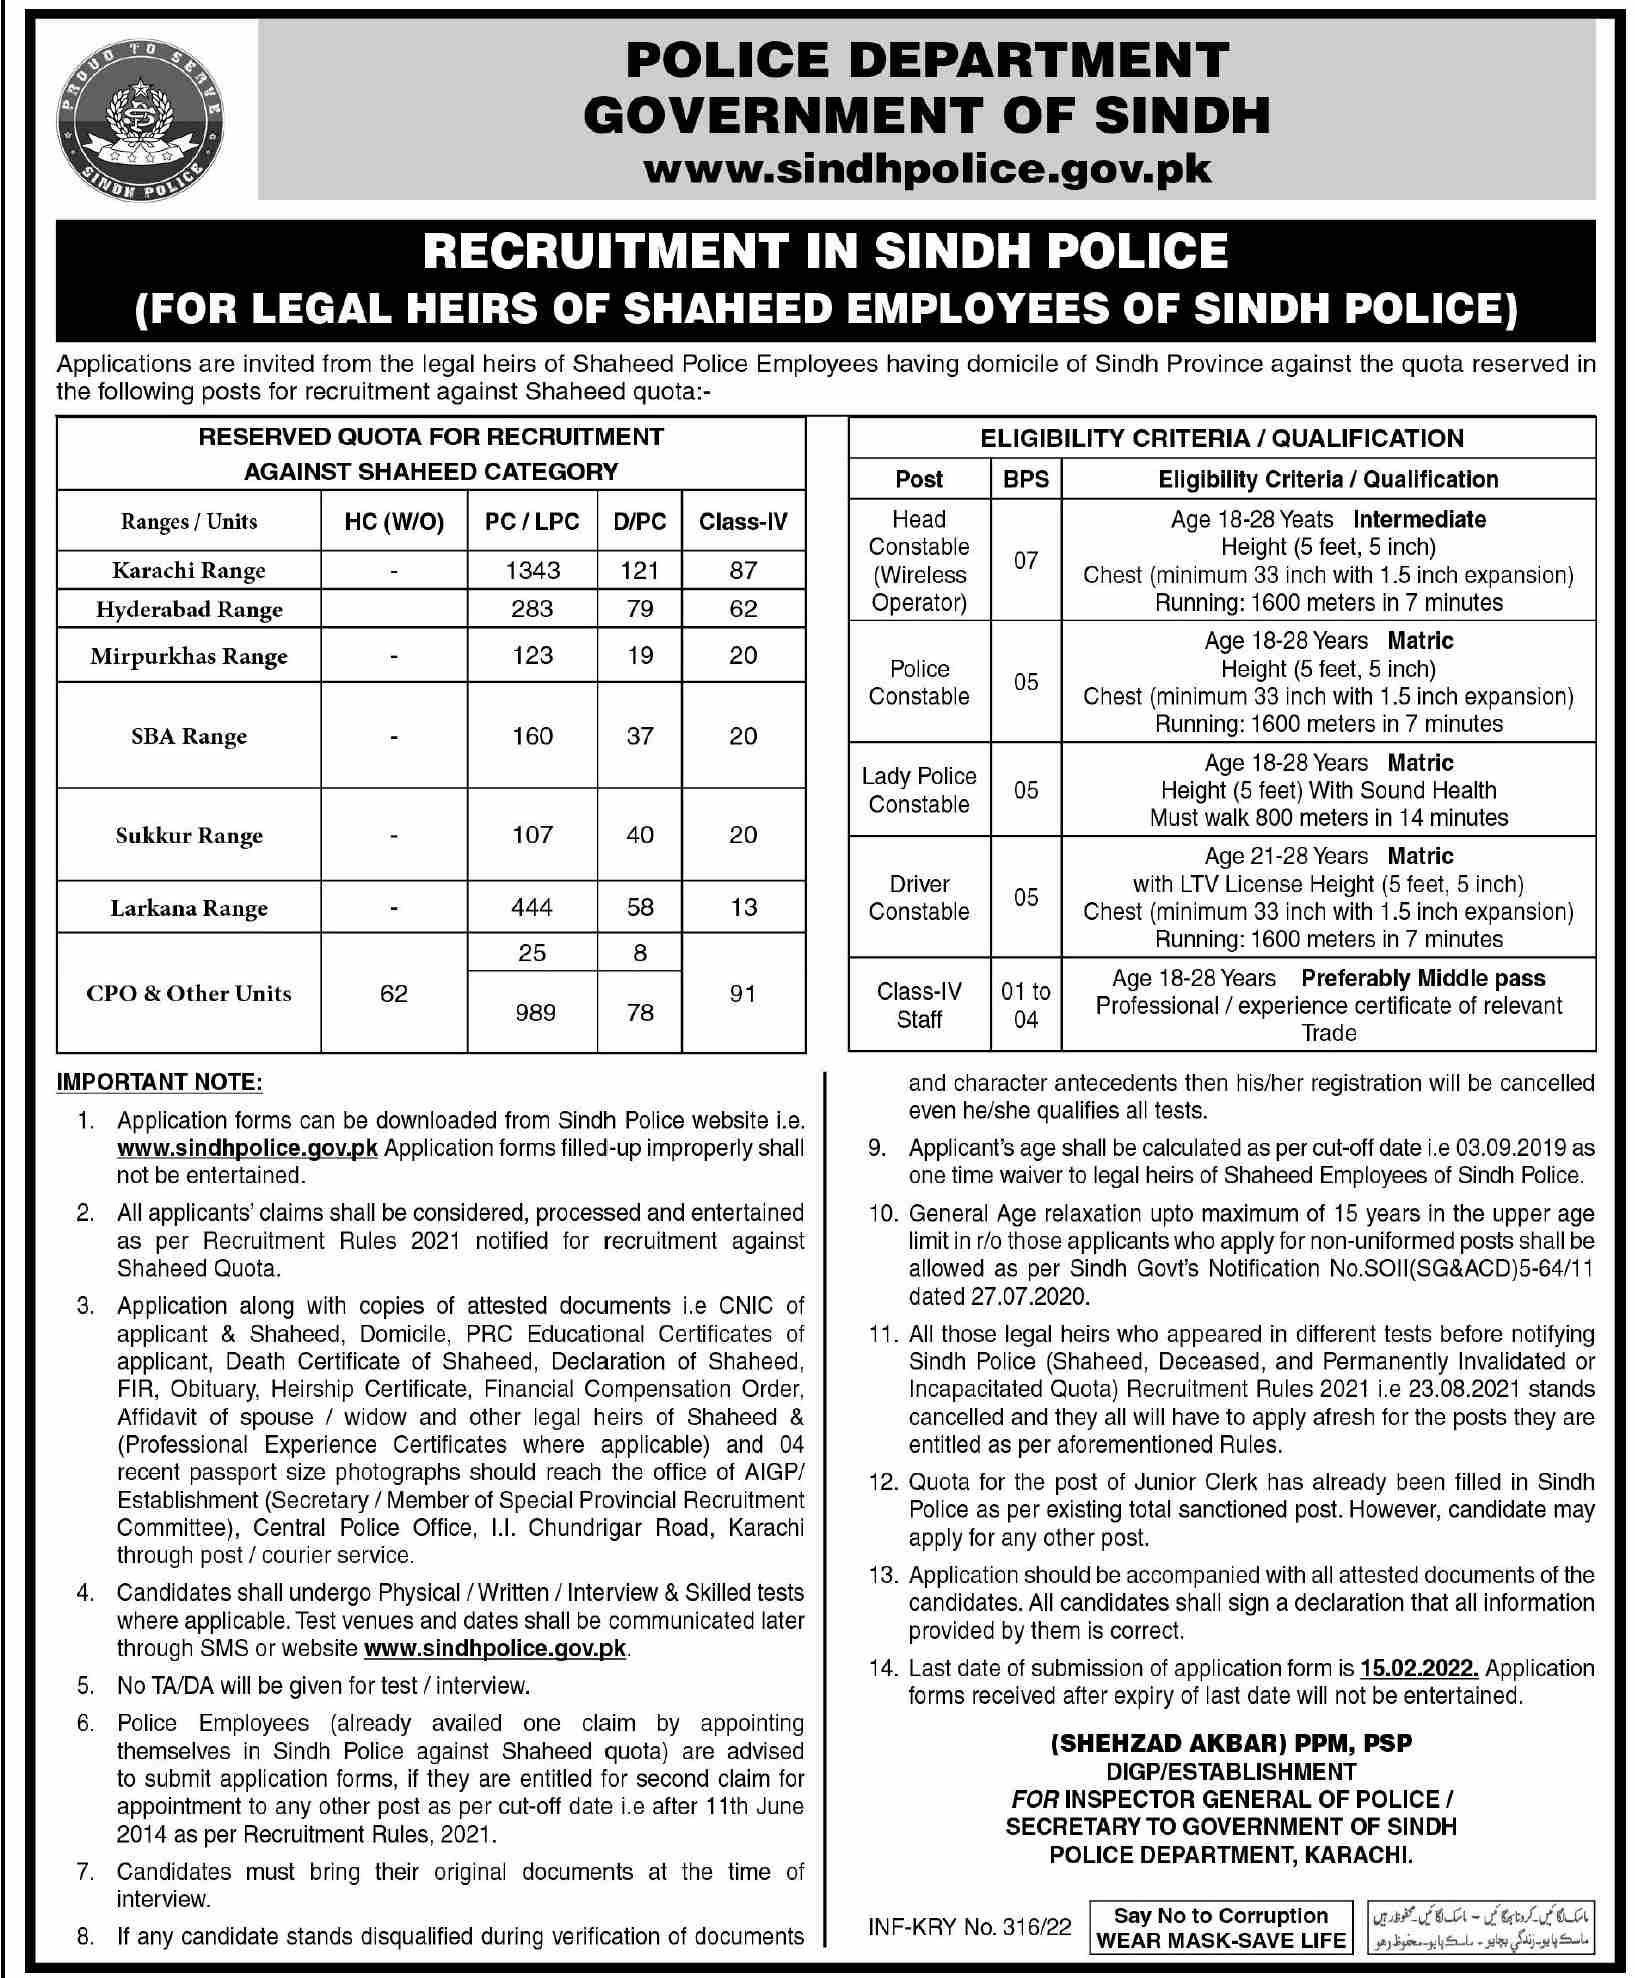 Latest Sindh Police Management Posts Karachi 2022 Sindh Police is looking for candidates for following posts as per job advertisement published in daily Dawn Newspaper of January 24, 2022 for location Karachi Sindh Pakistan: class iv head constable driver constable lady police constable and police constable  Preferred Education is Primary, Intermediate, Middle and Matric etc.  Apply at Sindh Police latest Government jobs in Management and departments before closing date which is around February 14, 2022 or as per closing date in newspaper ad. Read complete ad online to know how to apply on latest Sindh Police job opportunities.